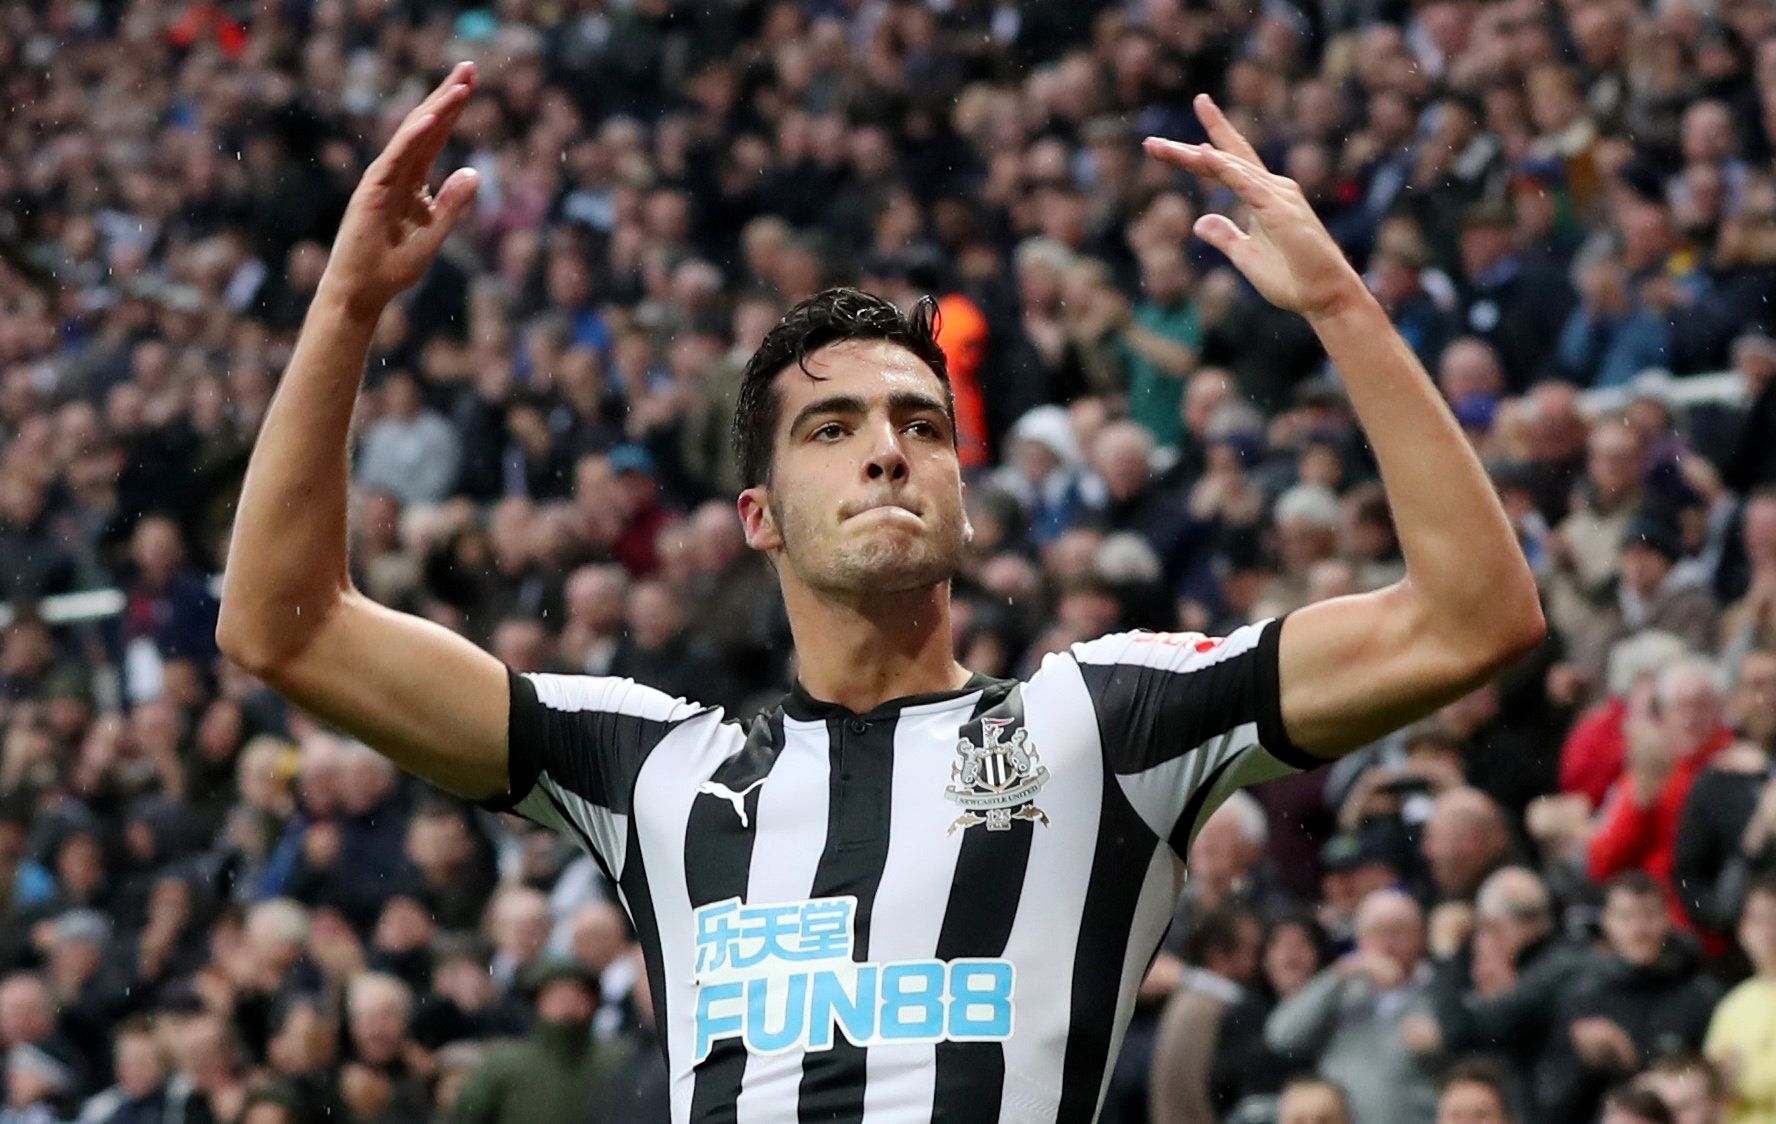 Soccer Football - Premier League - Newcastle United vs Crystal Palace - St James' Park, Newcastle, Britain - October 21, 2017   Newcastle United's Mikel Merino celebrates scoring their first goal      REUTERS/Scott Heppell    EDITORIAL USE ONLY. No use with unauthorized audio, video, data, fixture lists, club/league logos or 